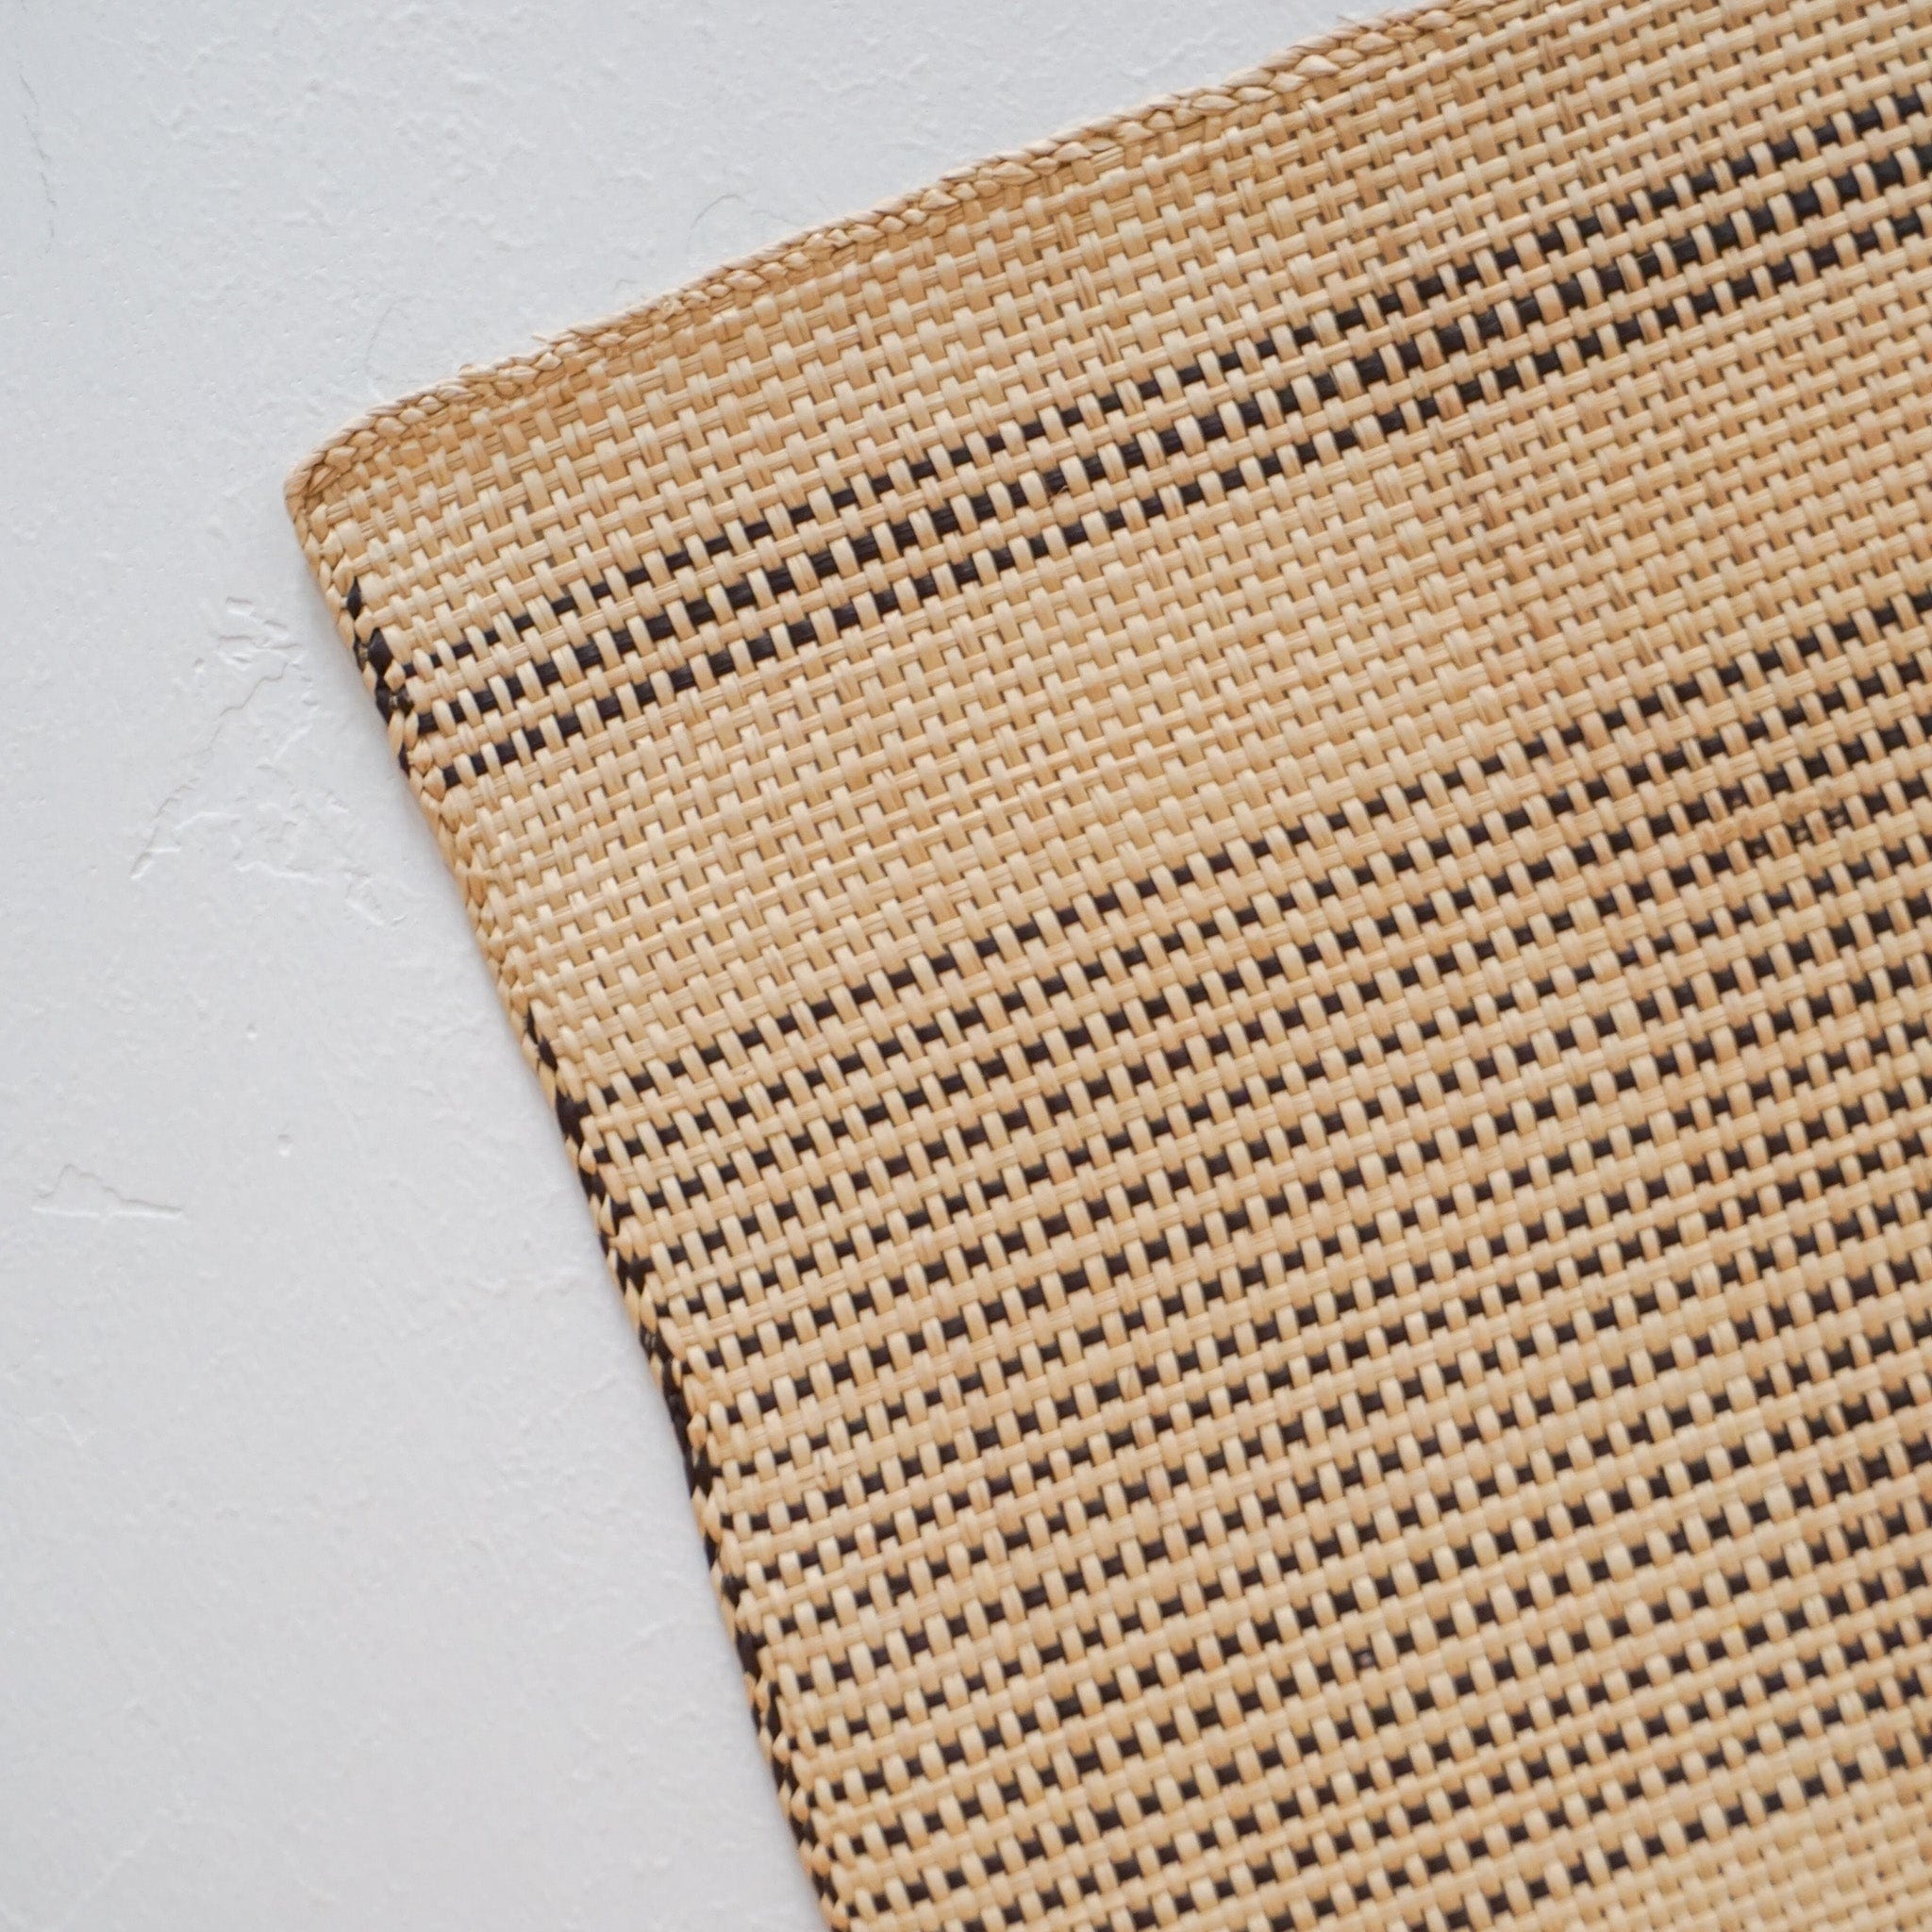 Guanabana Placemats Beige/Black Striped Straw Placemat by Guanabana